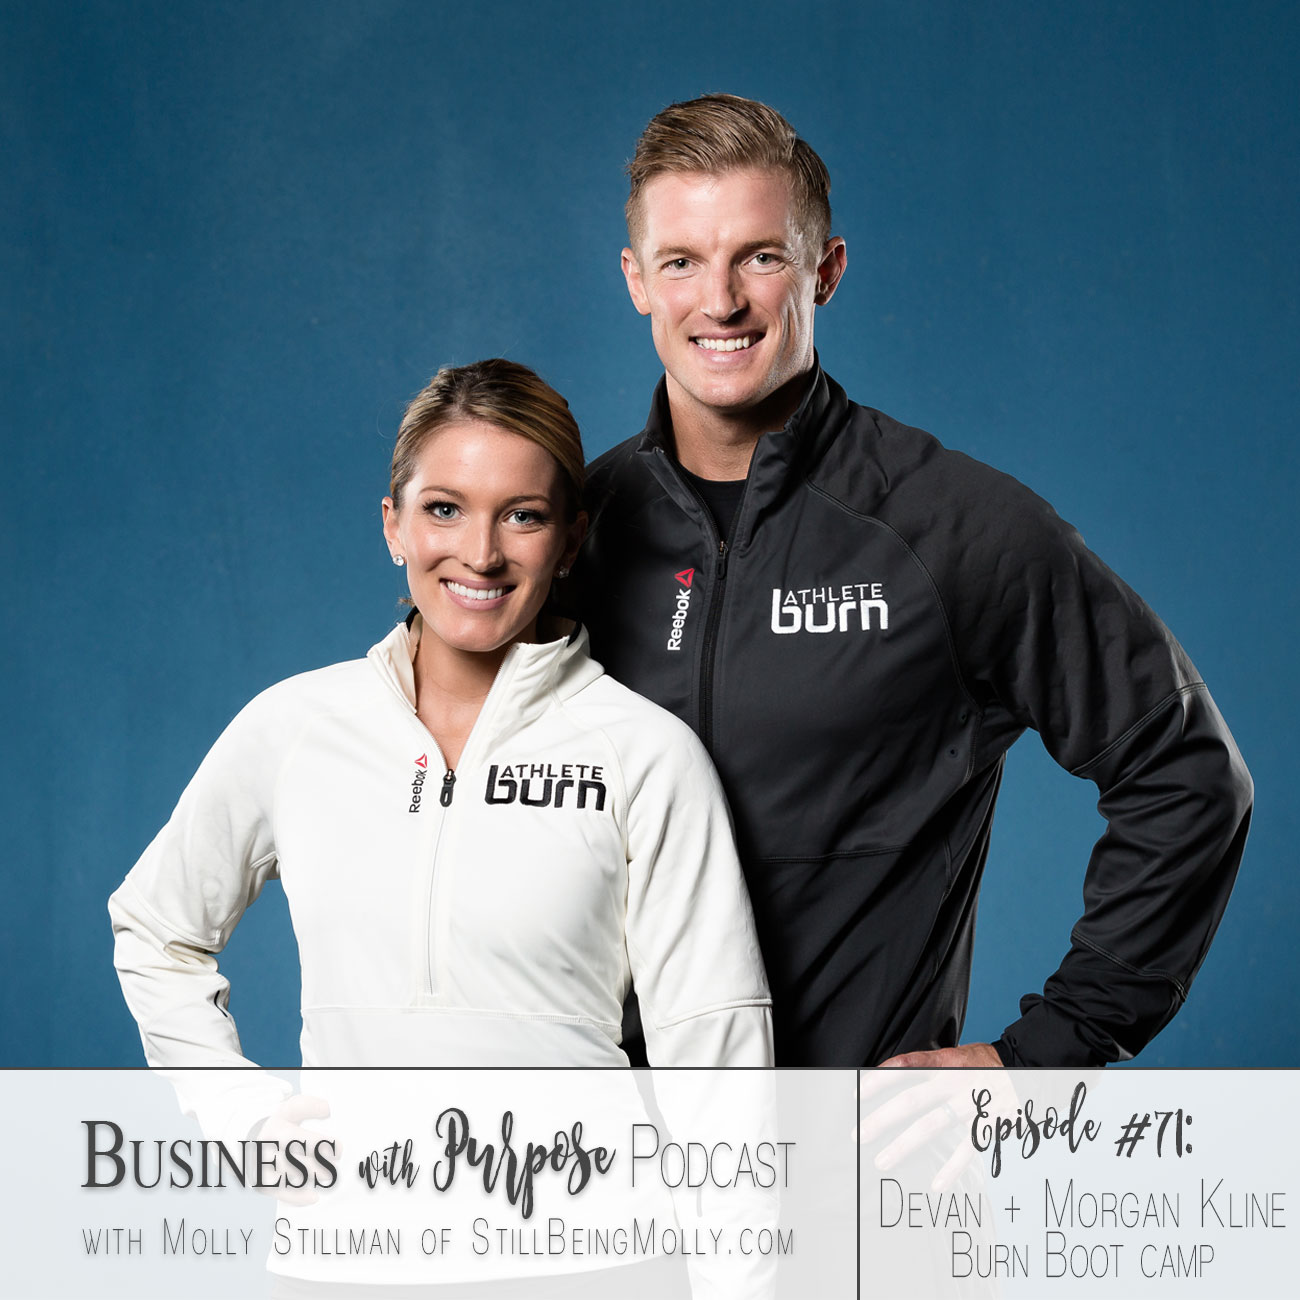 Business with Purpose Podcast EP 71: Devan Kline and Morgan Kline, Founders of Burn Boot Camp by popular North Carolina lifestyle blogger and podcaster Still Being Molly